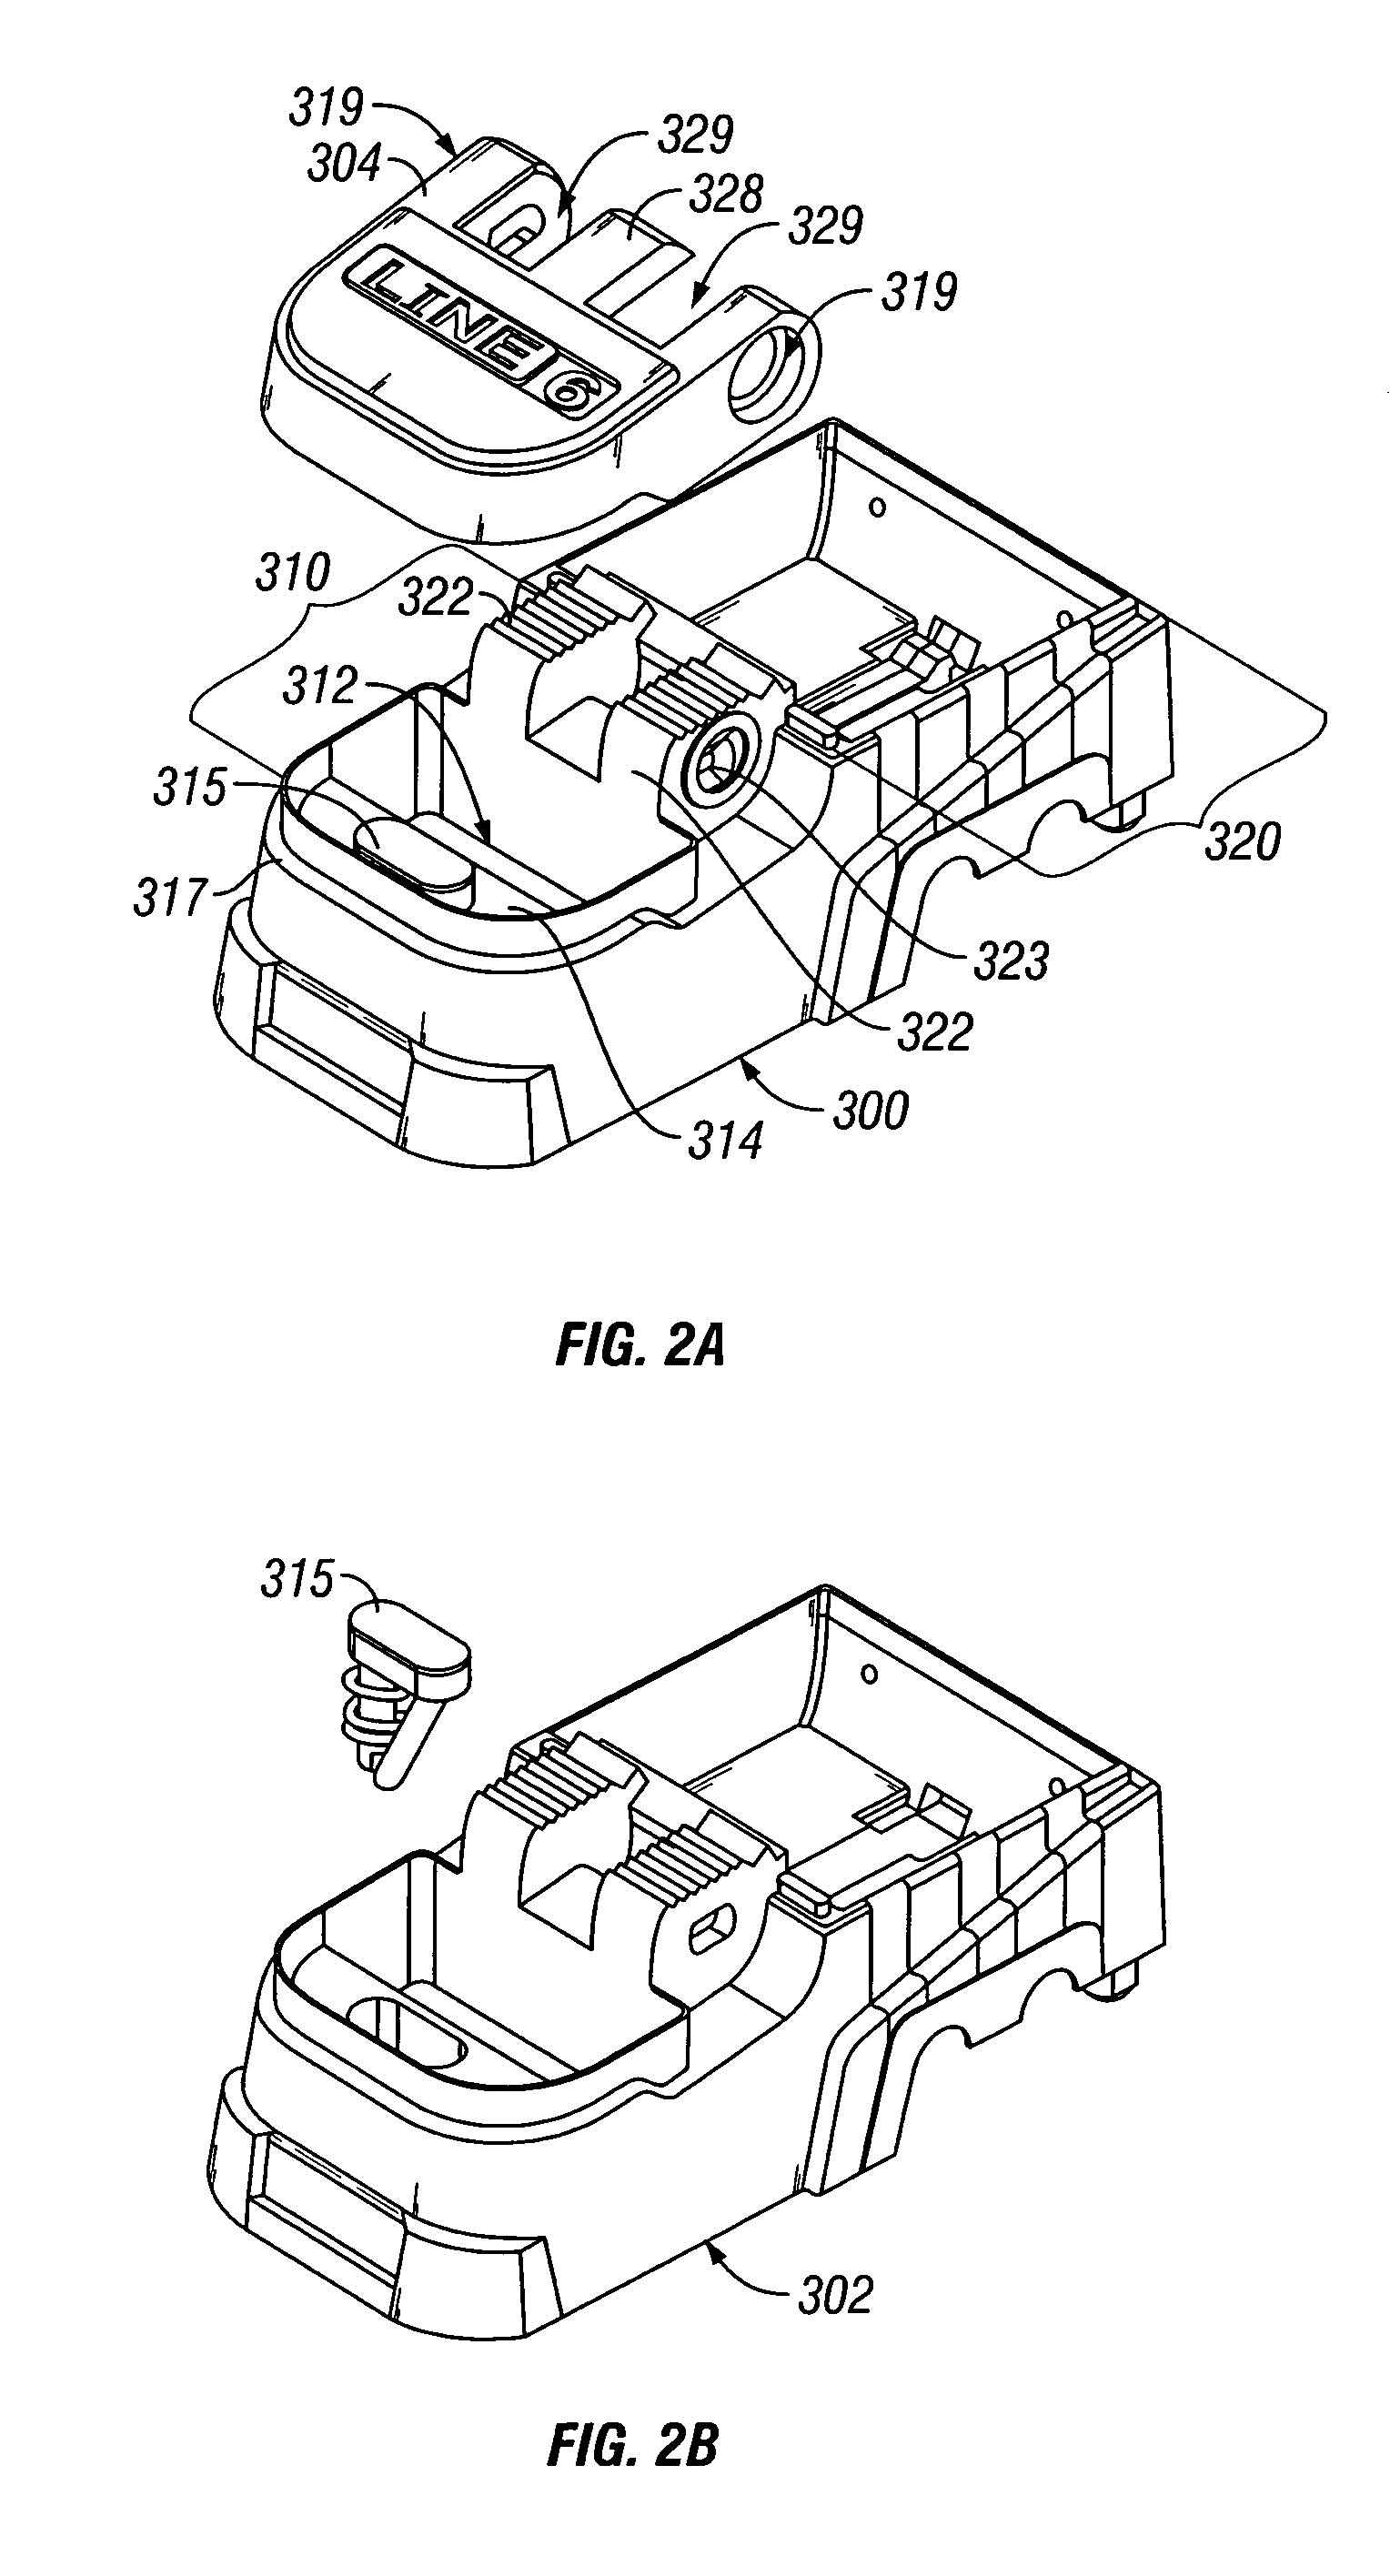 Audio signal processor with modular user interface and processing functionality